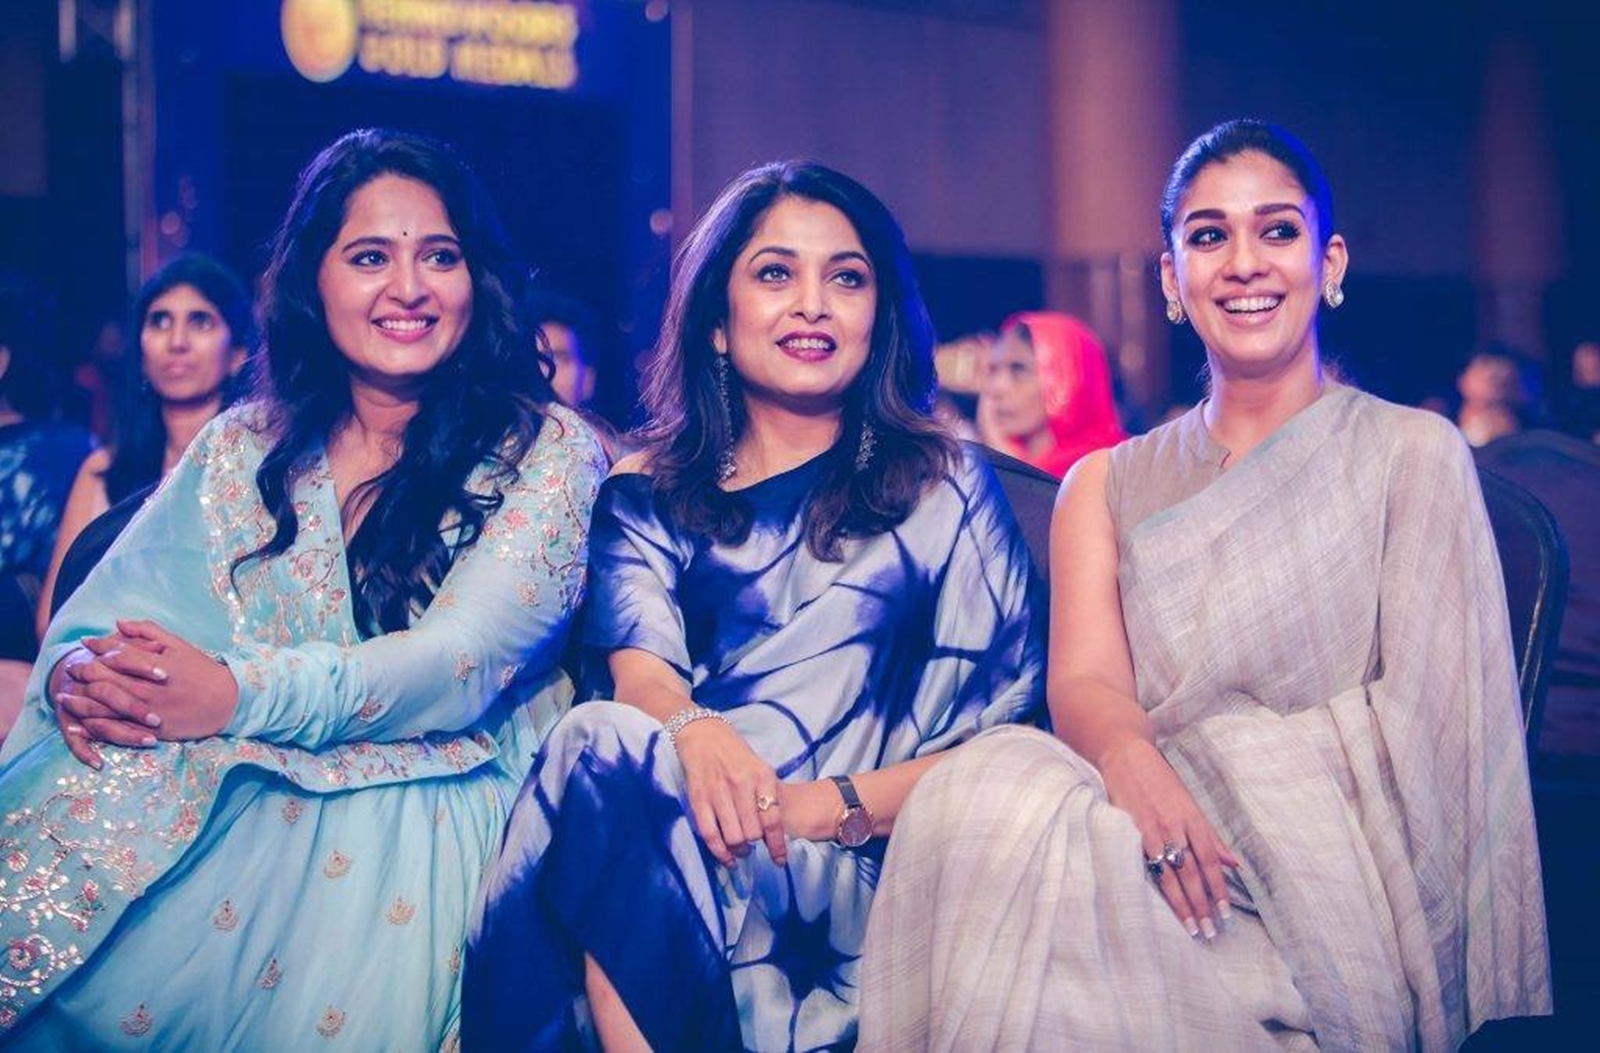 The Anushka Shetty style: Defying odds while being the mistress of own  decisions | Telugu News - The Indian Express